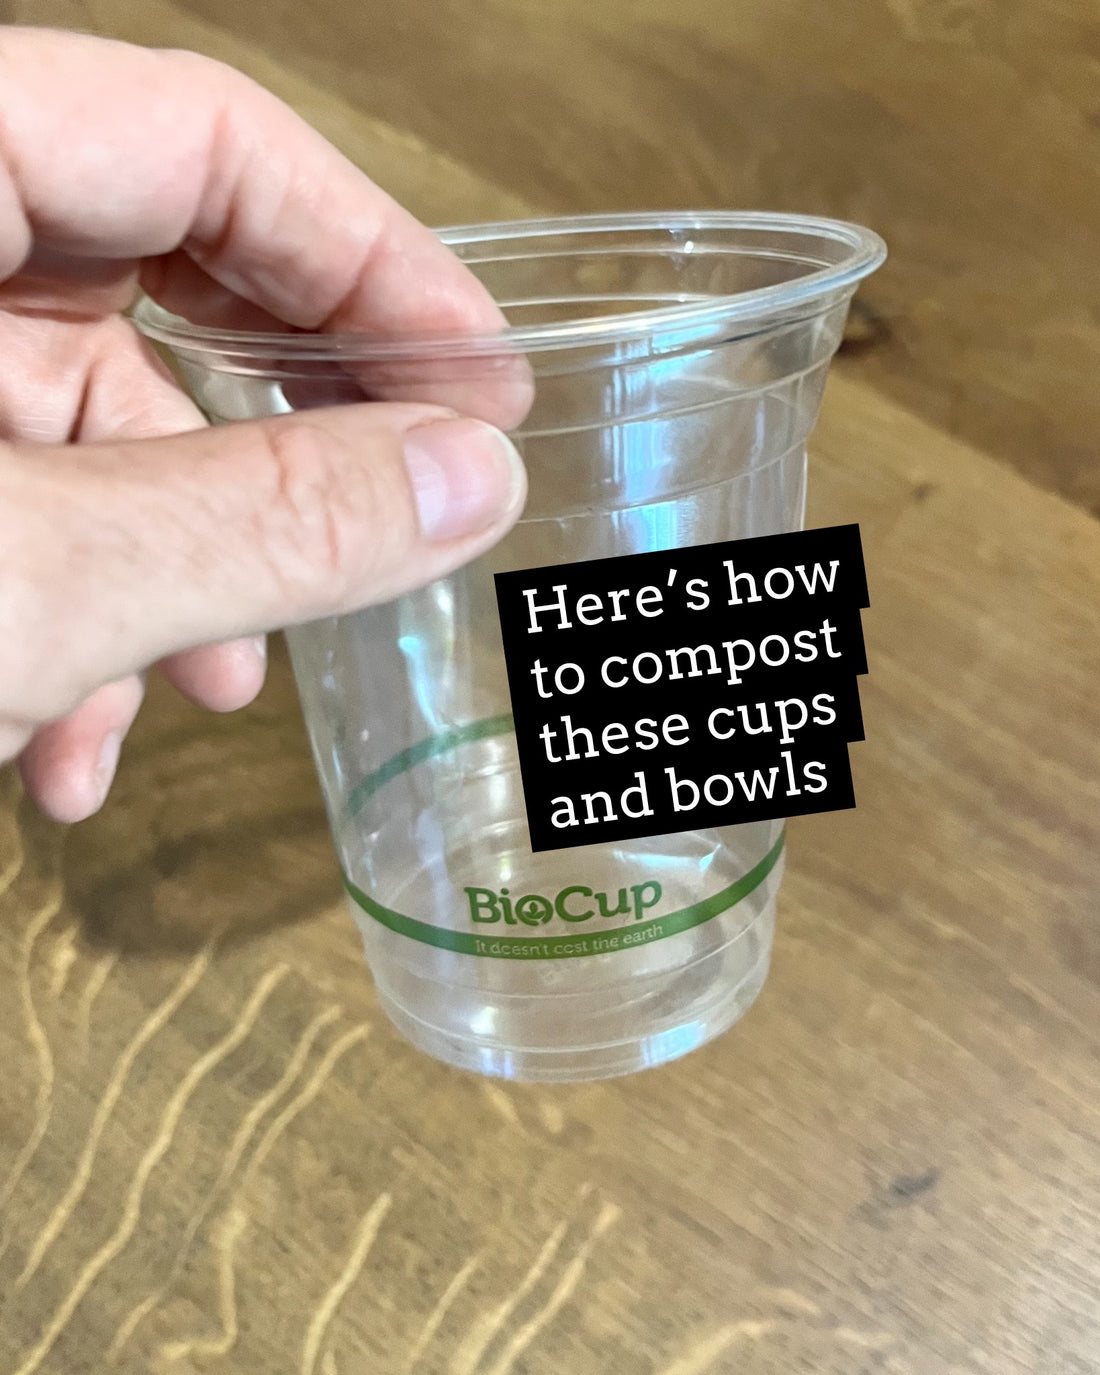 Here's how to compost the BioPlastic Cups and Bowls